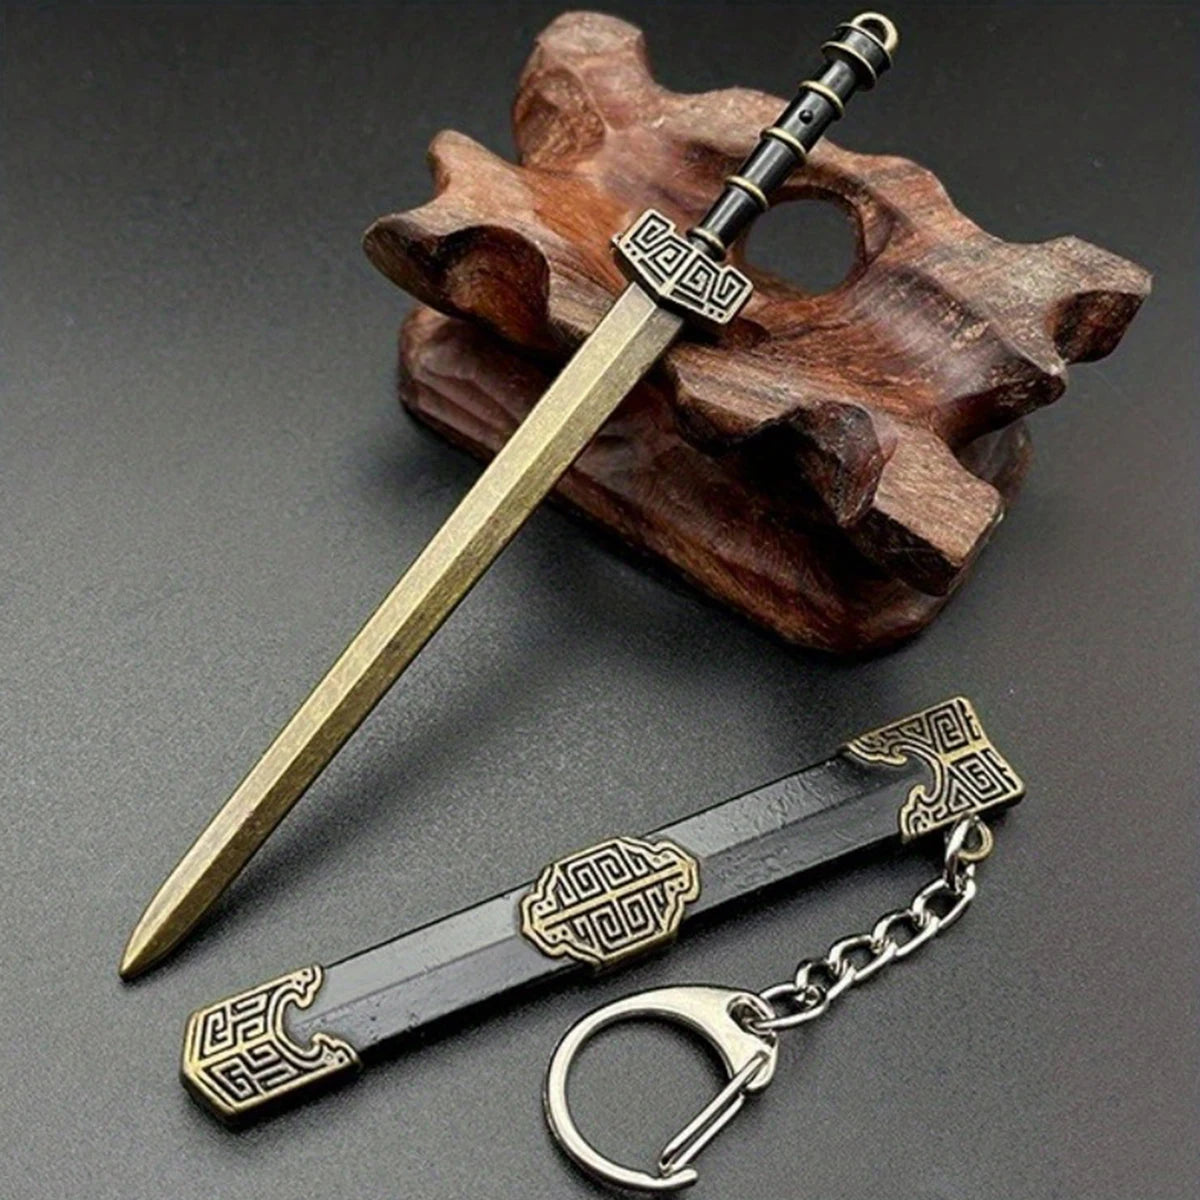 Ancient Chinese Mini Sword KeyChain First Emperor of Qin KeyRing Sword Metal Weapon Toy Key Chain Pendant Cute Keychain